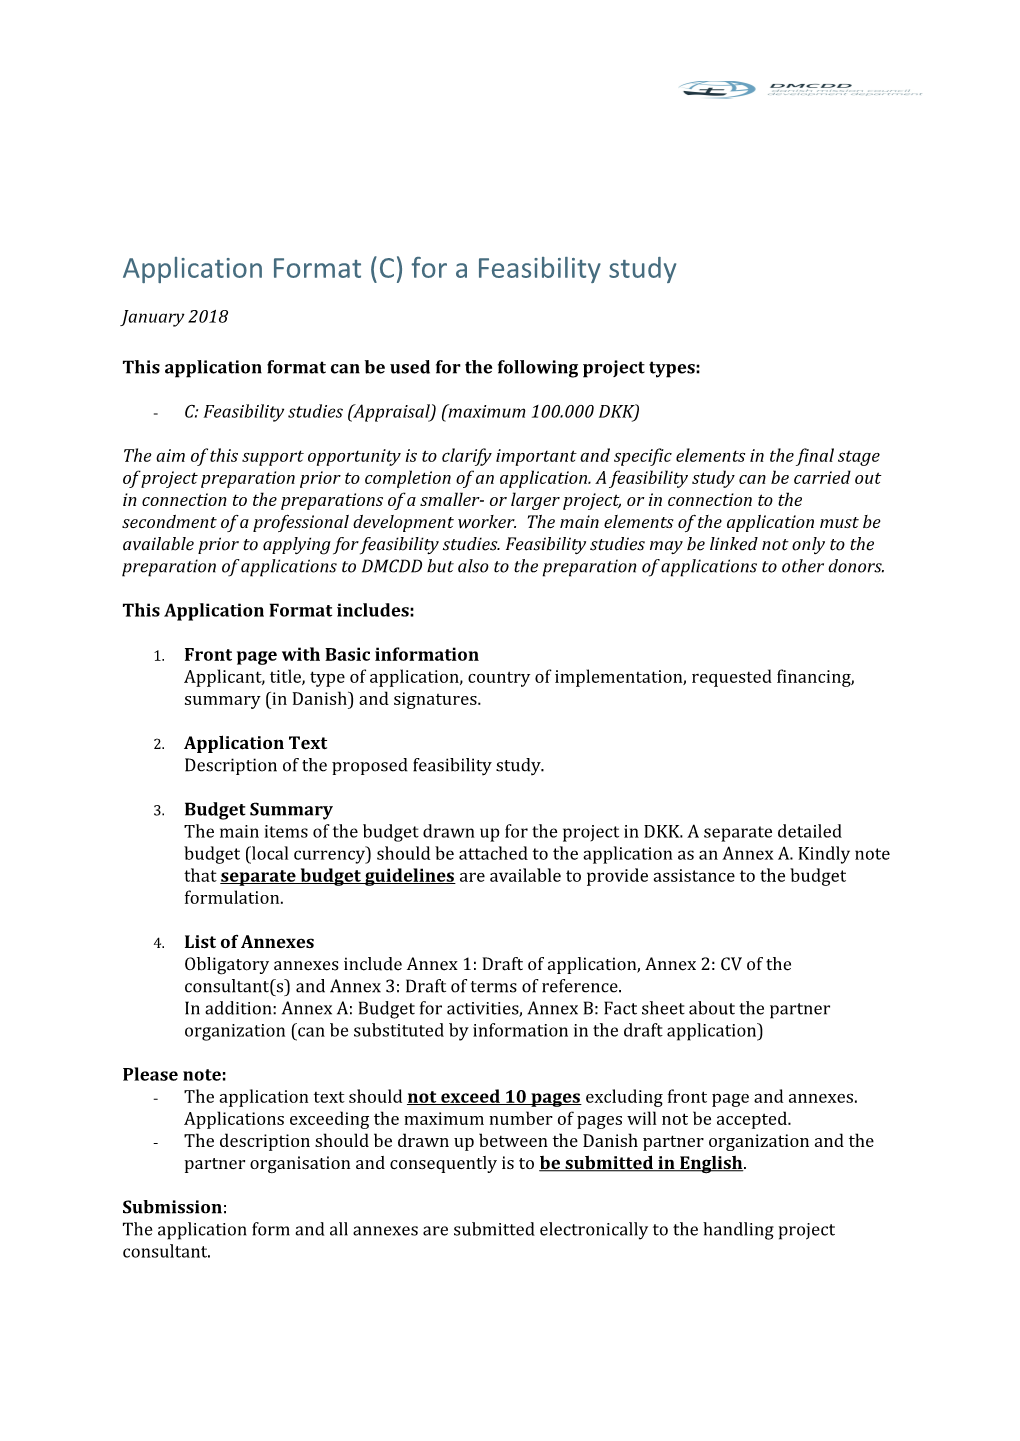 Application Format (C) for a Feasibility Study